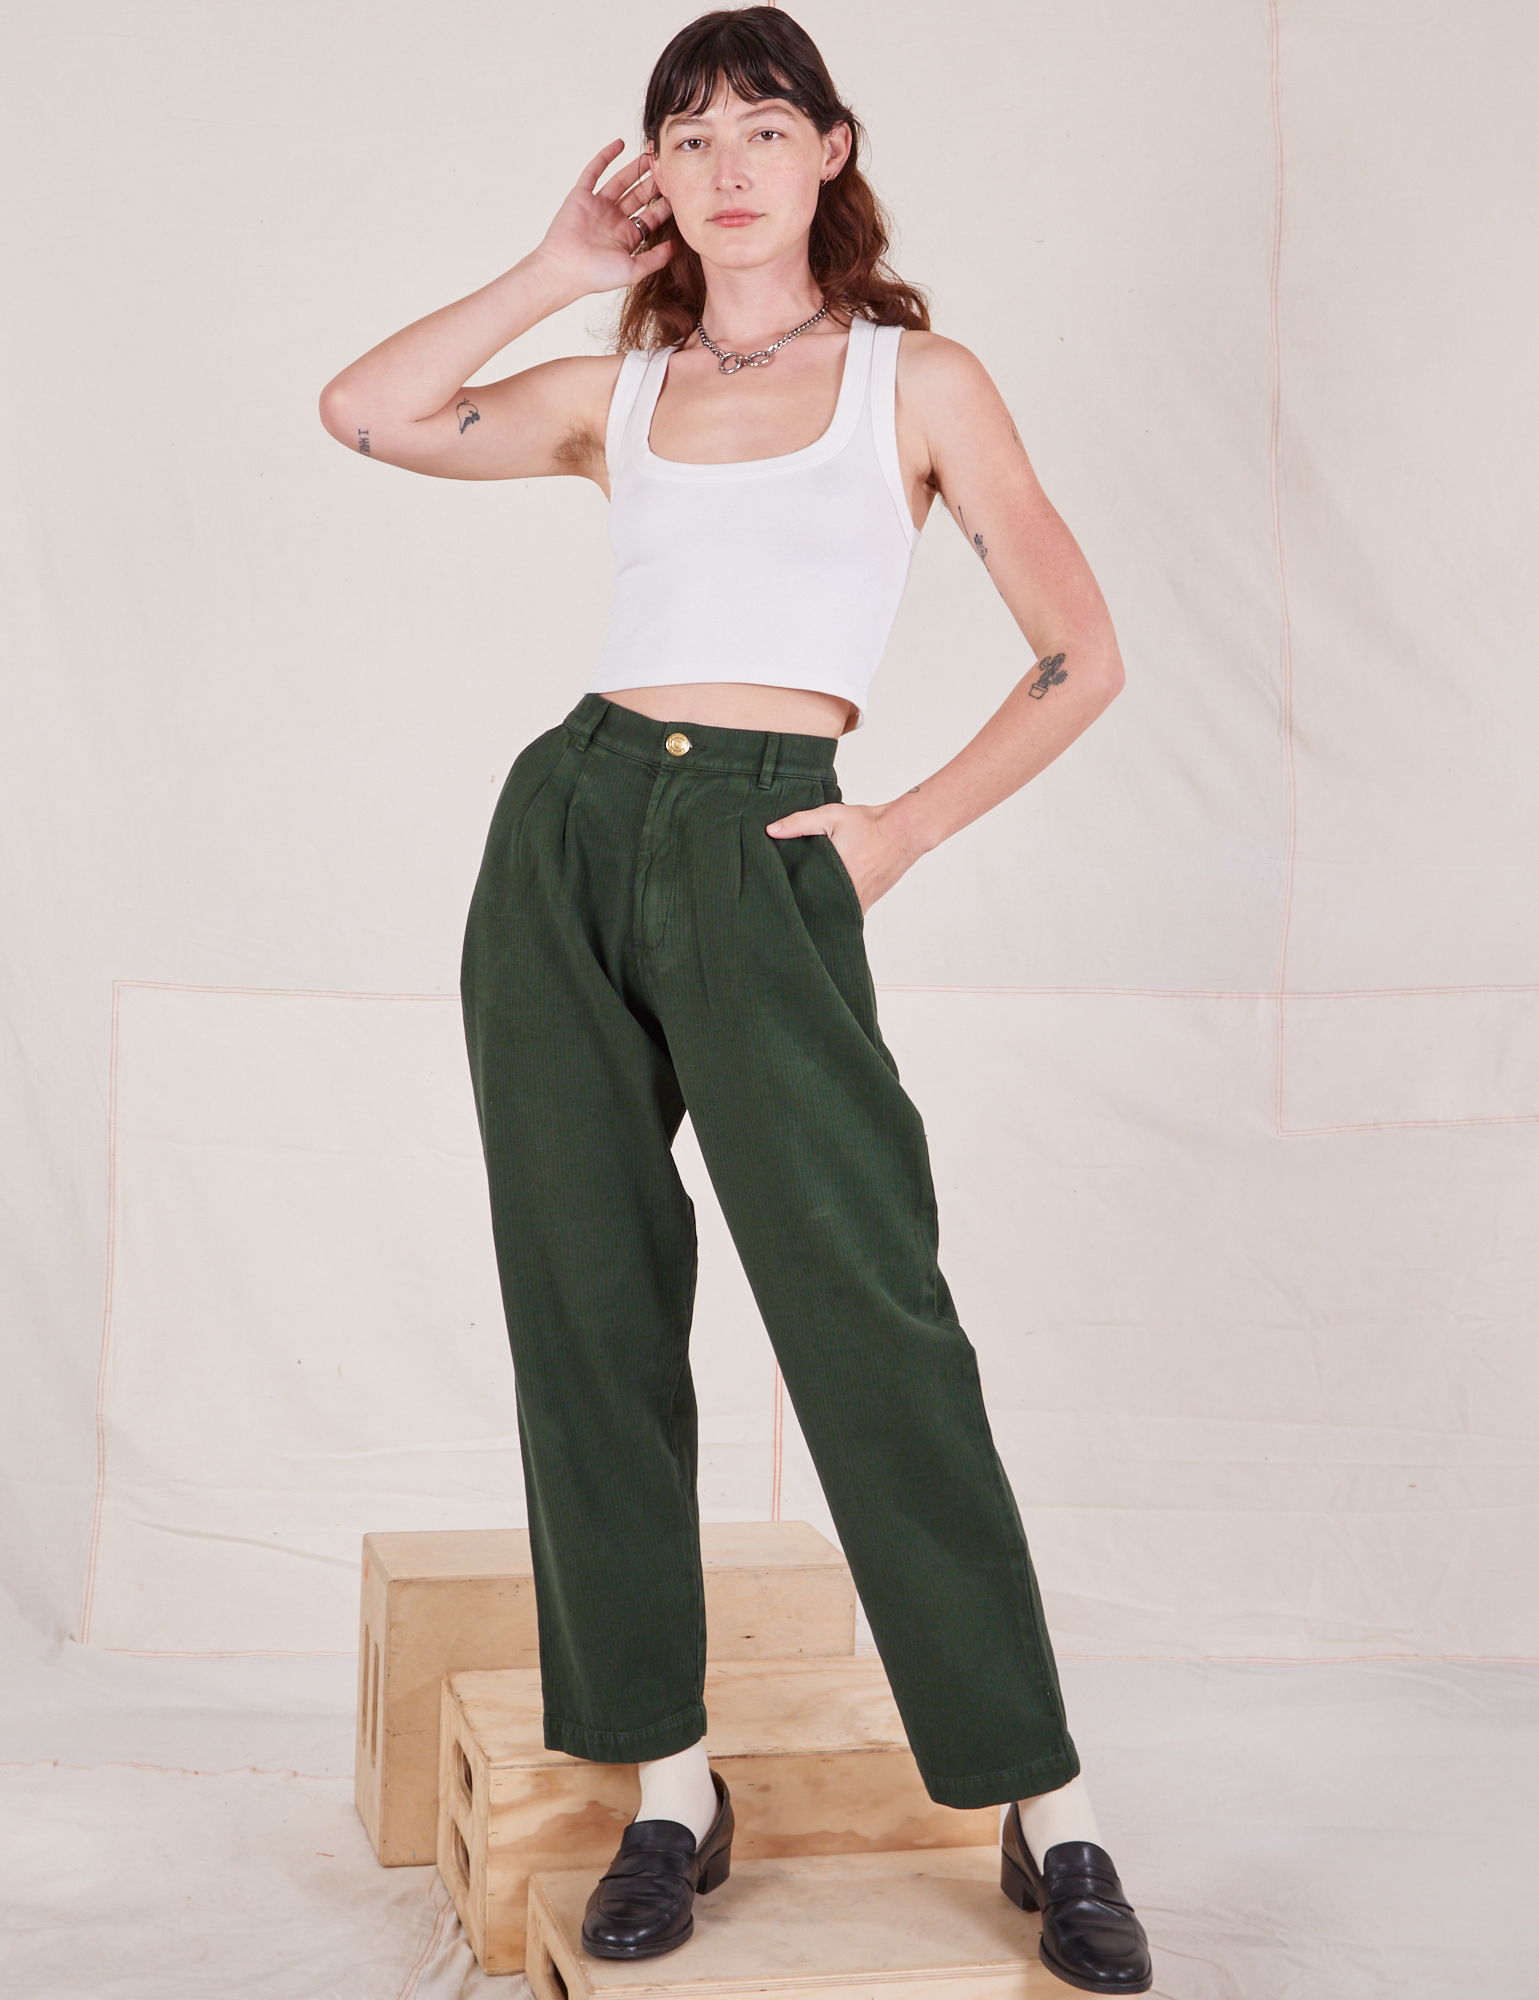 Alex is 5'8" and wearing XXS Heritage Trousers in Swamp Green paired with vintage off-white Cropped Tank Top